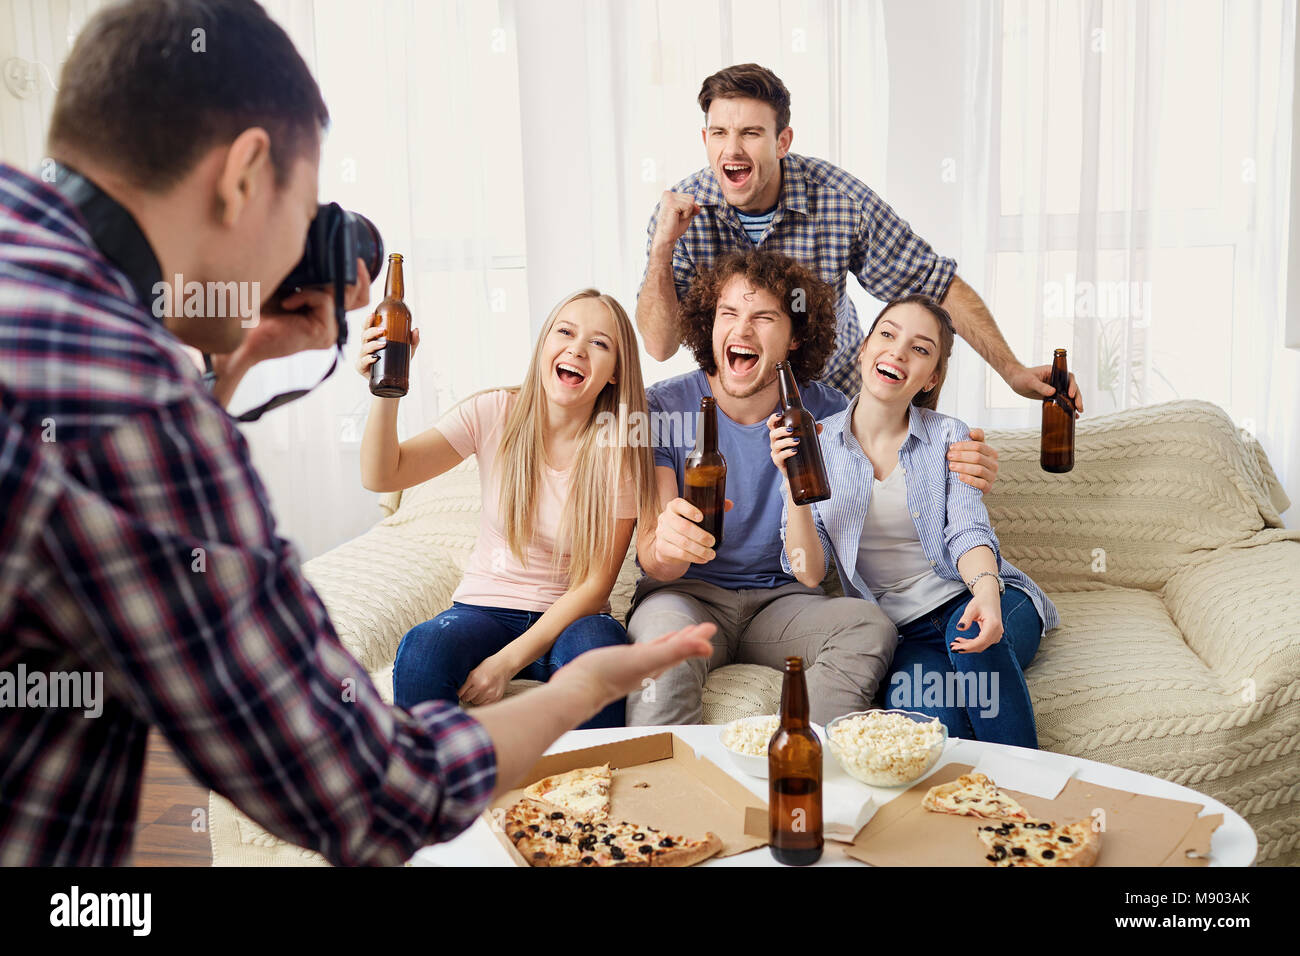 A group of friends are photographed on a camera. Stock Photo